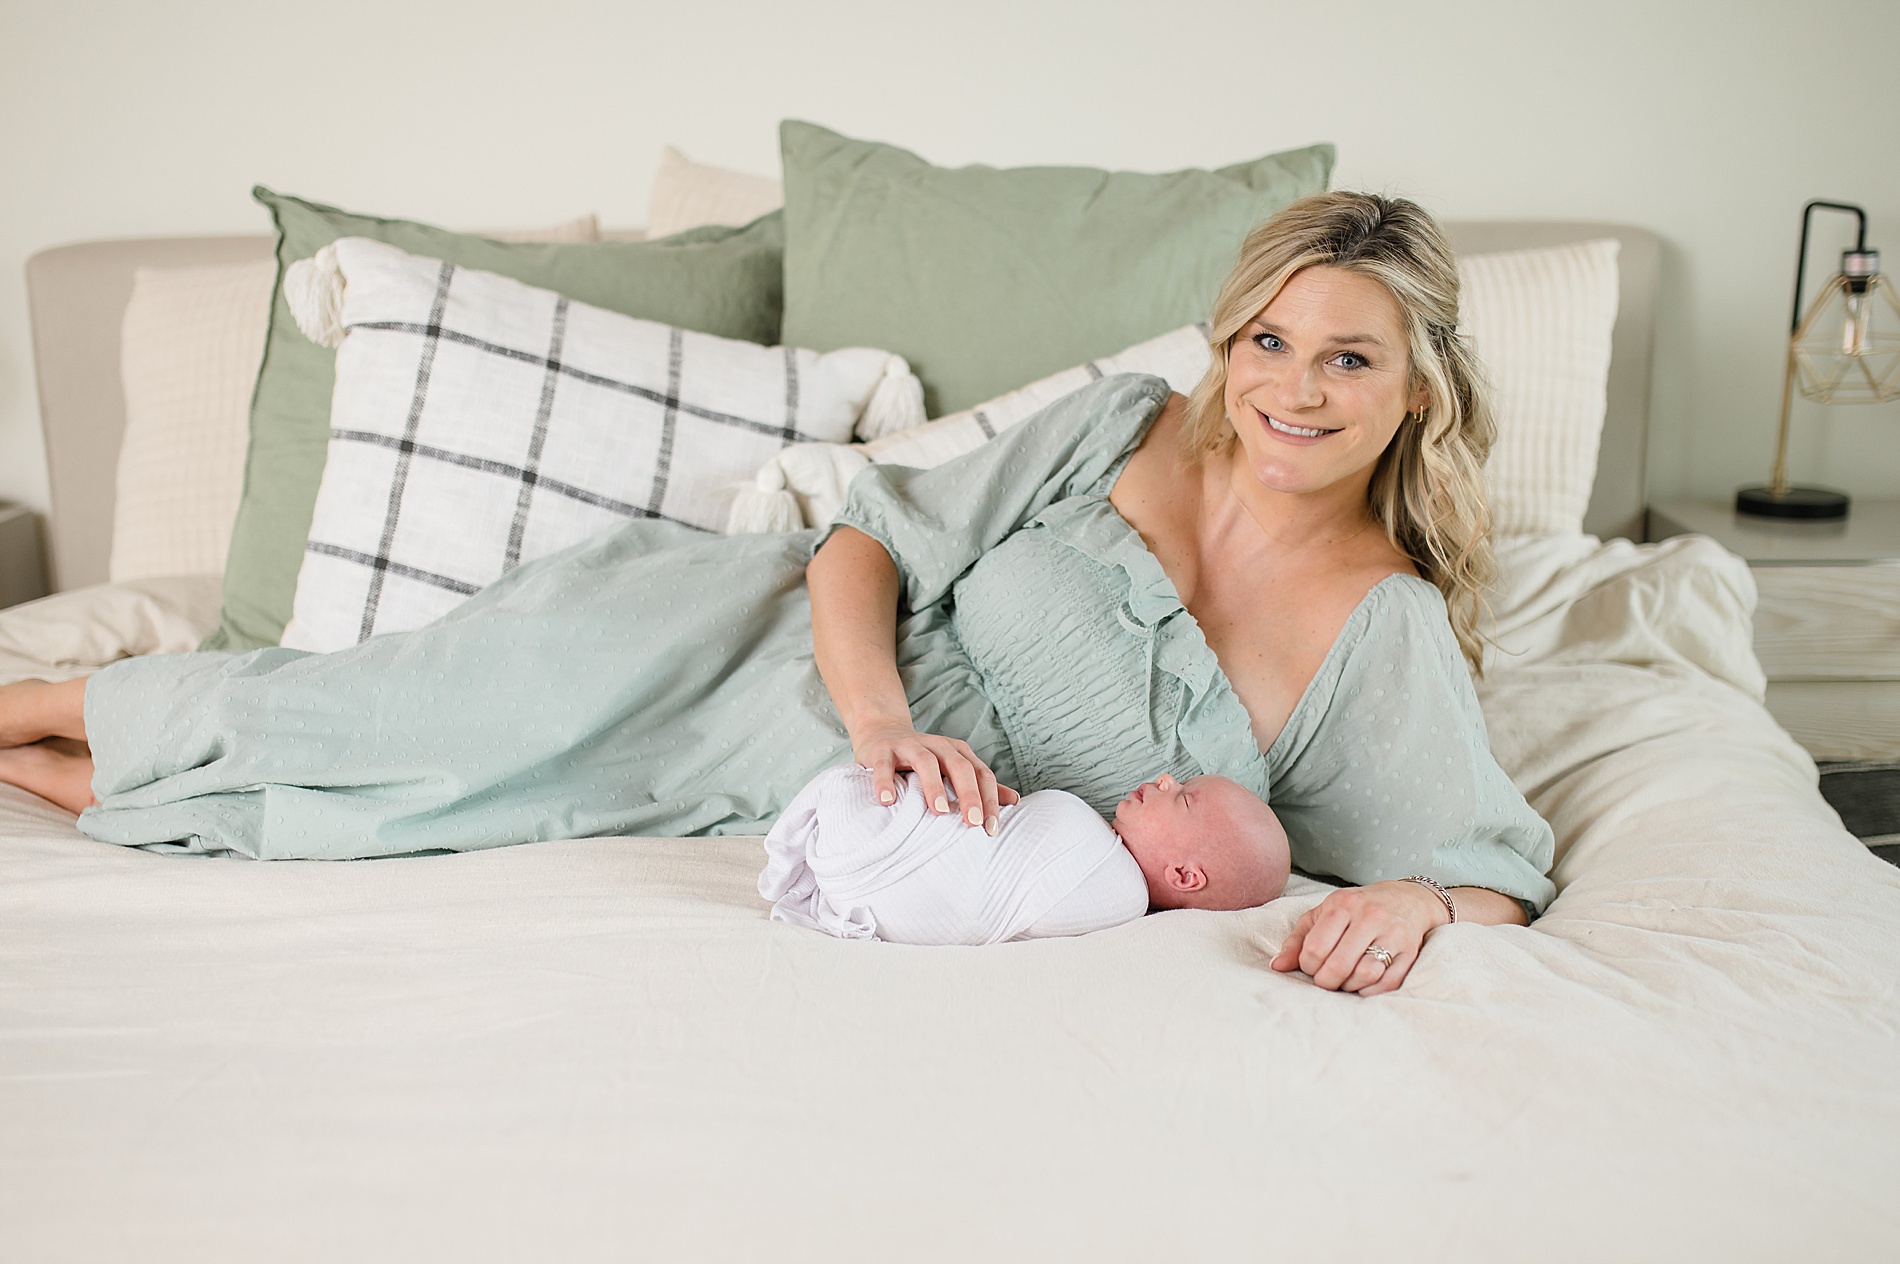 mom lays with her newborn son taken by Dallas Newborn photographer, Lindsey Dutton Photography
